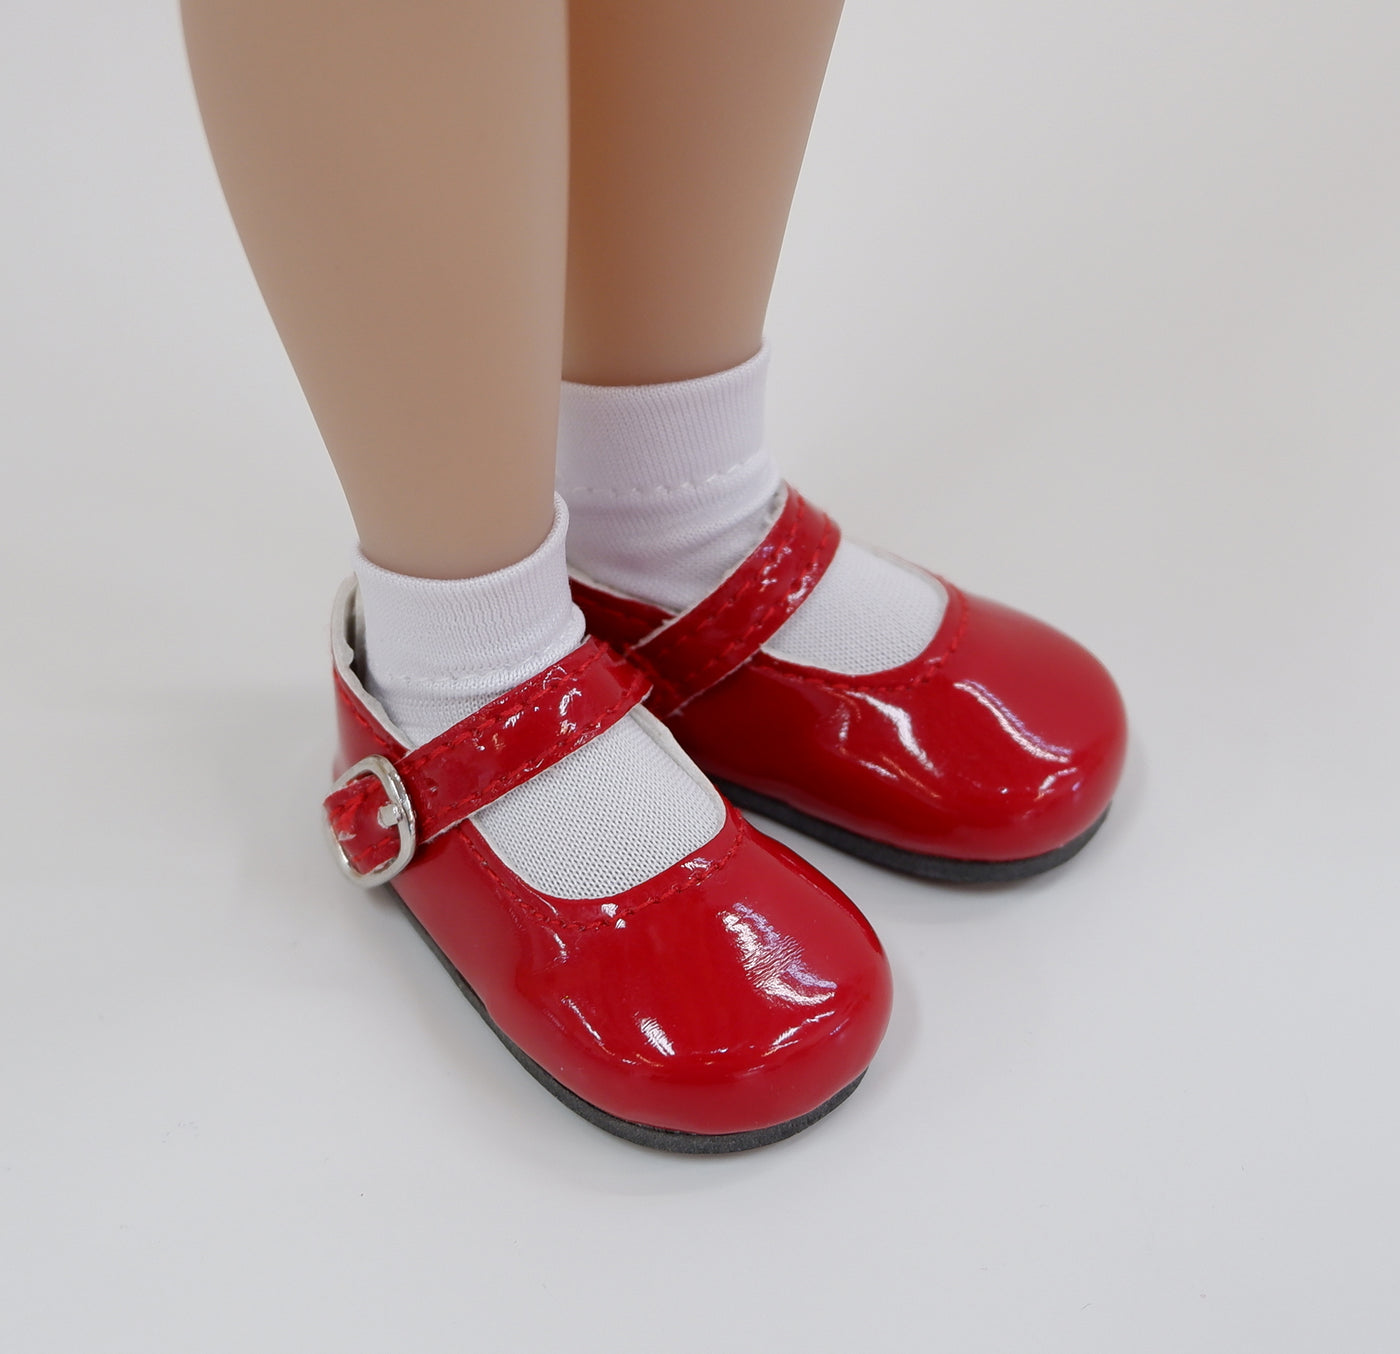 FACTORY SECONDS Simple Mary Jane Shoes - Patent Red